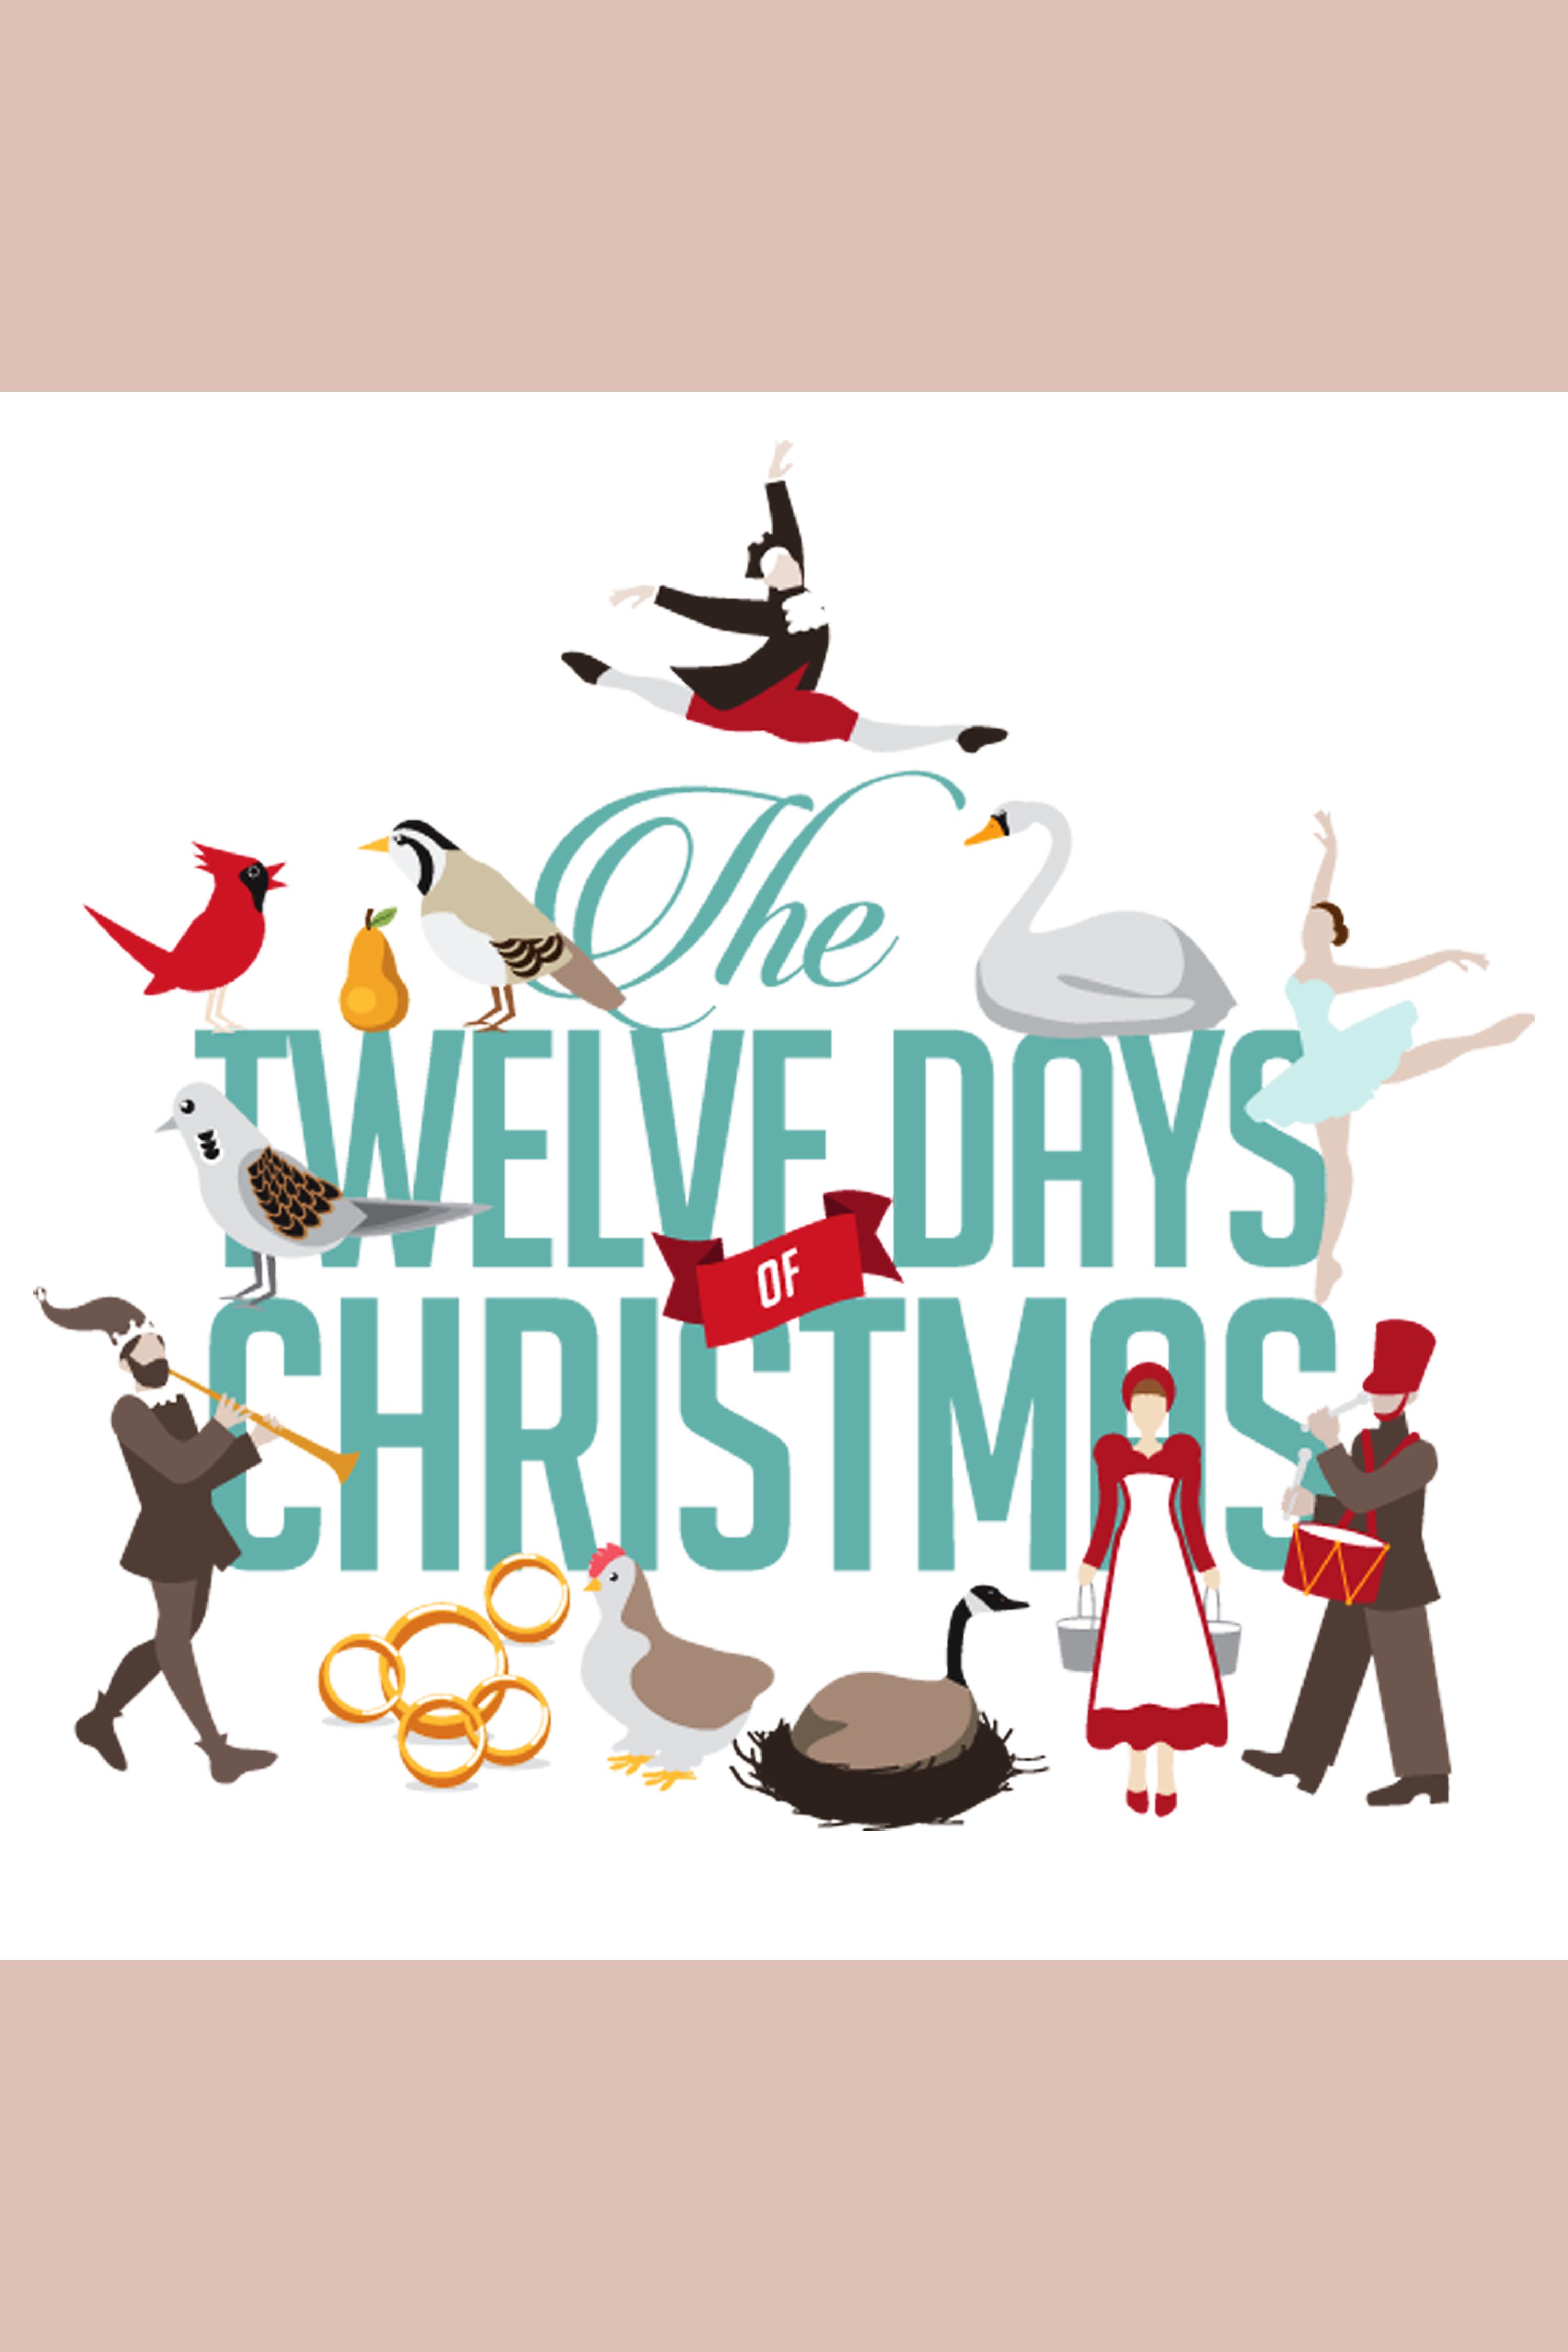 The Twelve Days of Christmas cover image